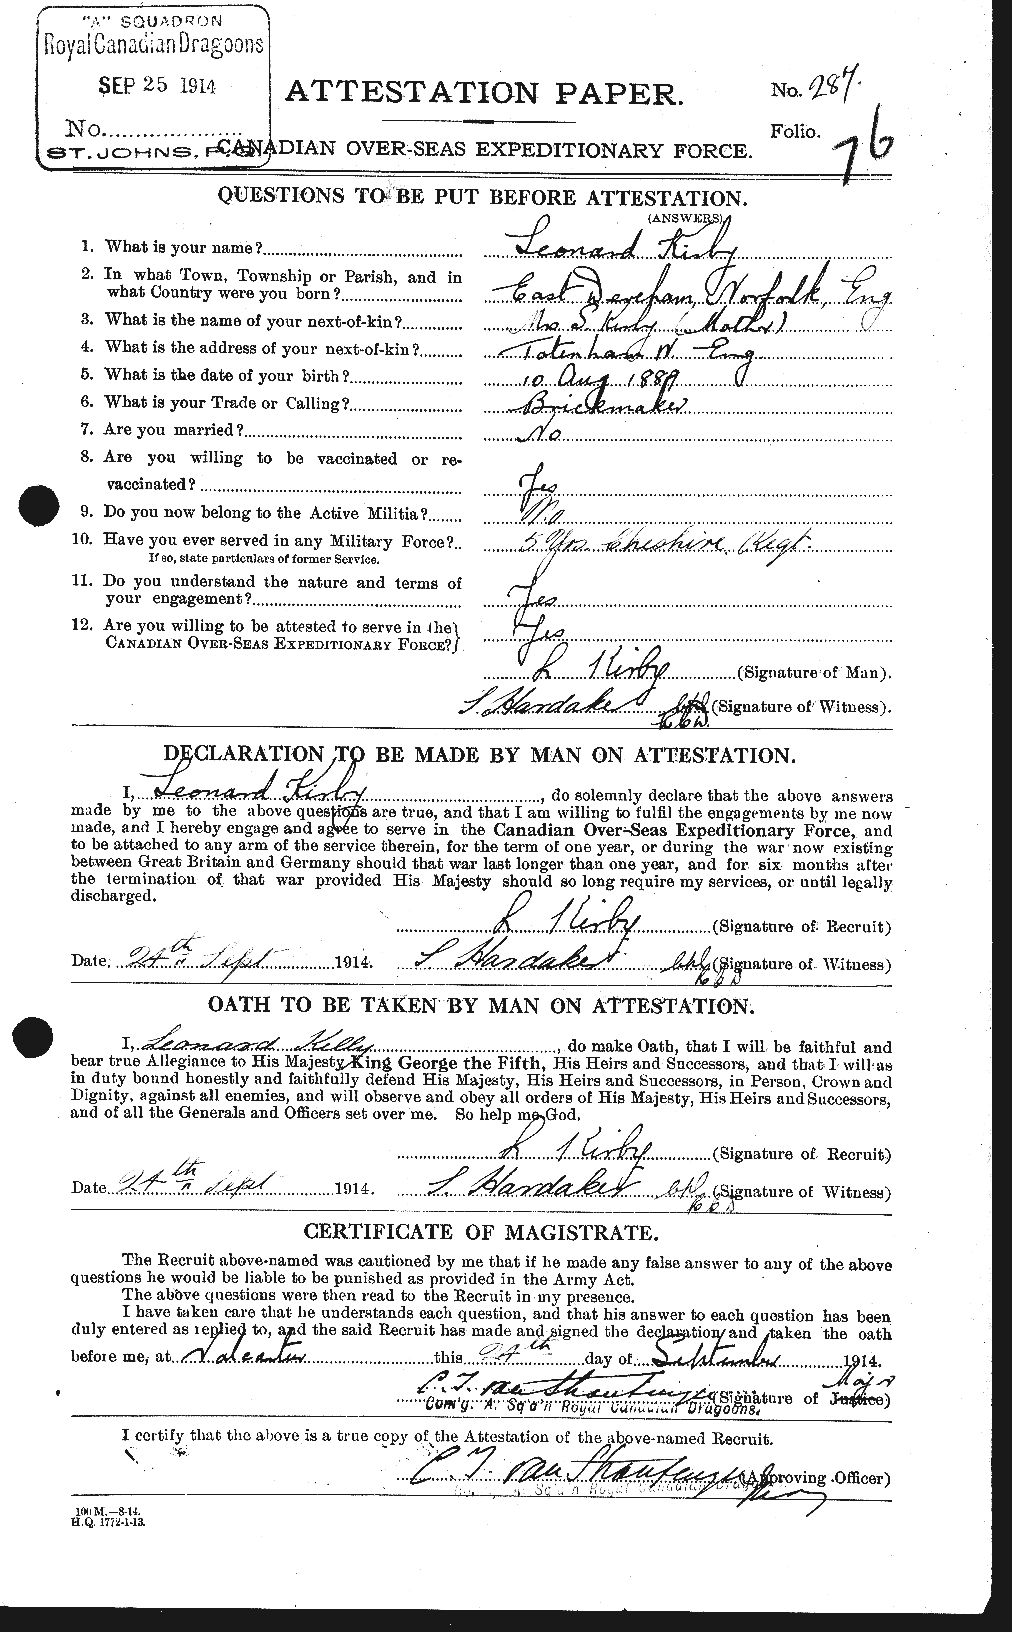 Personnel Records of the First World War - CEF 437246a